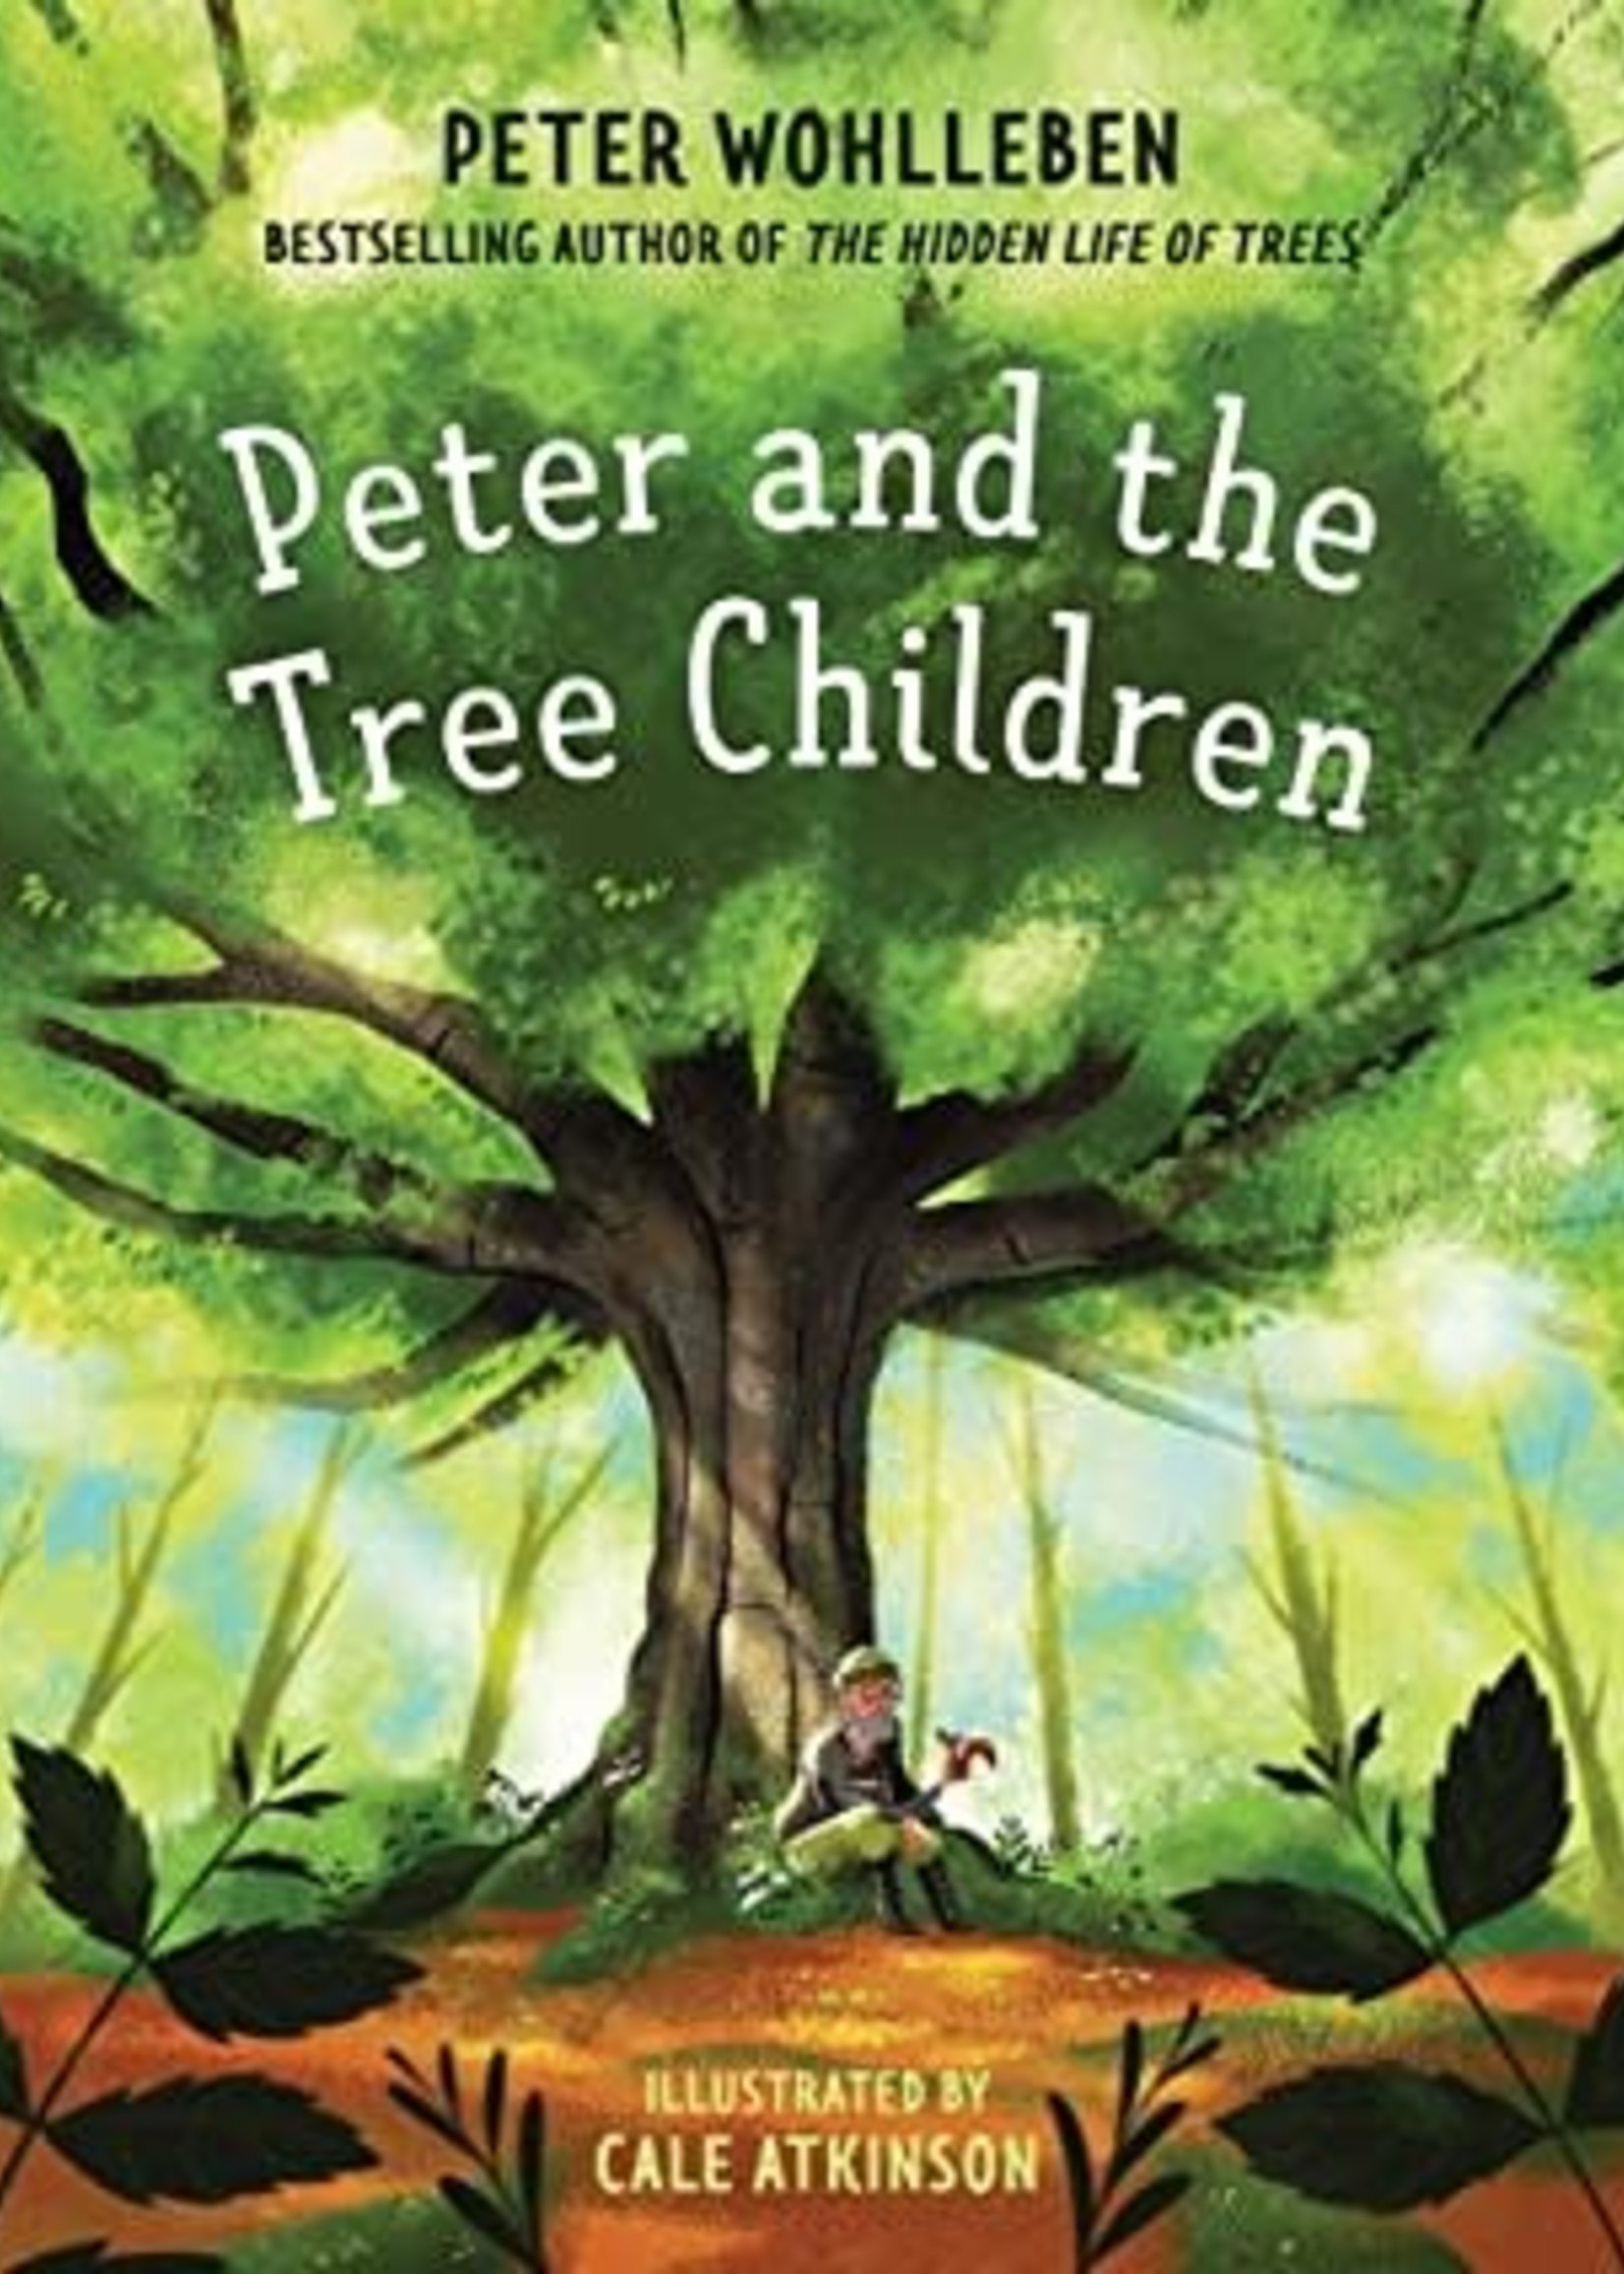 Peter and the Tree Children by Peter Wohlleben